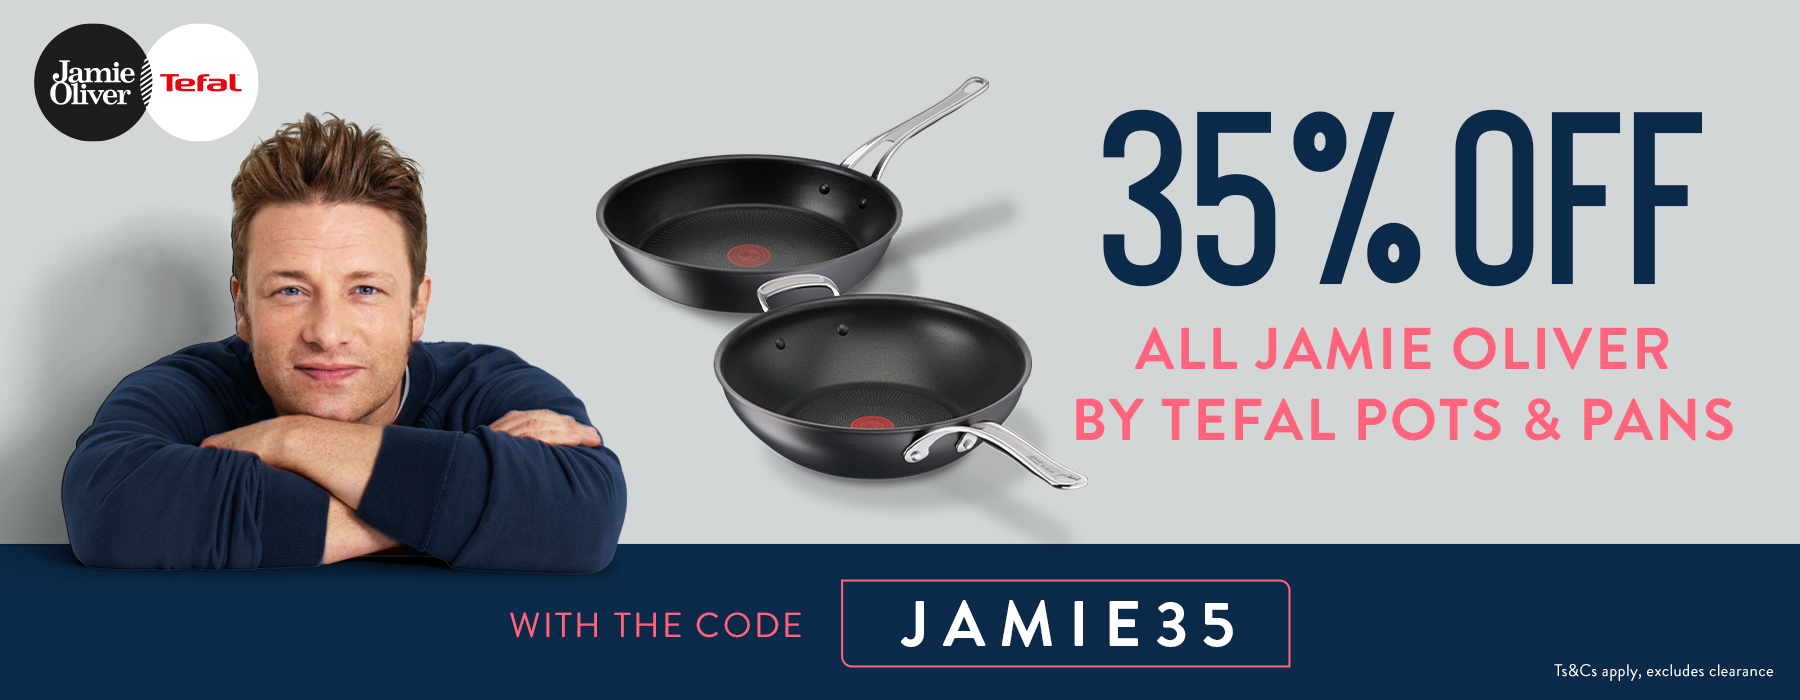 cate-promo-banner-Jamie Oliver Frying Pans